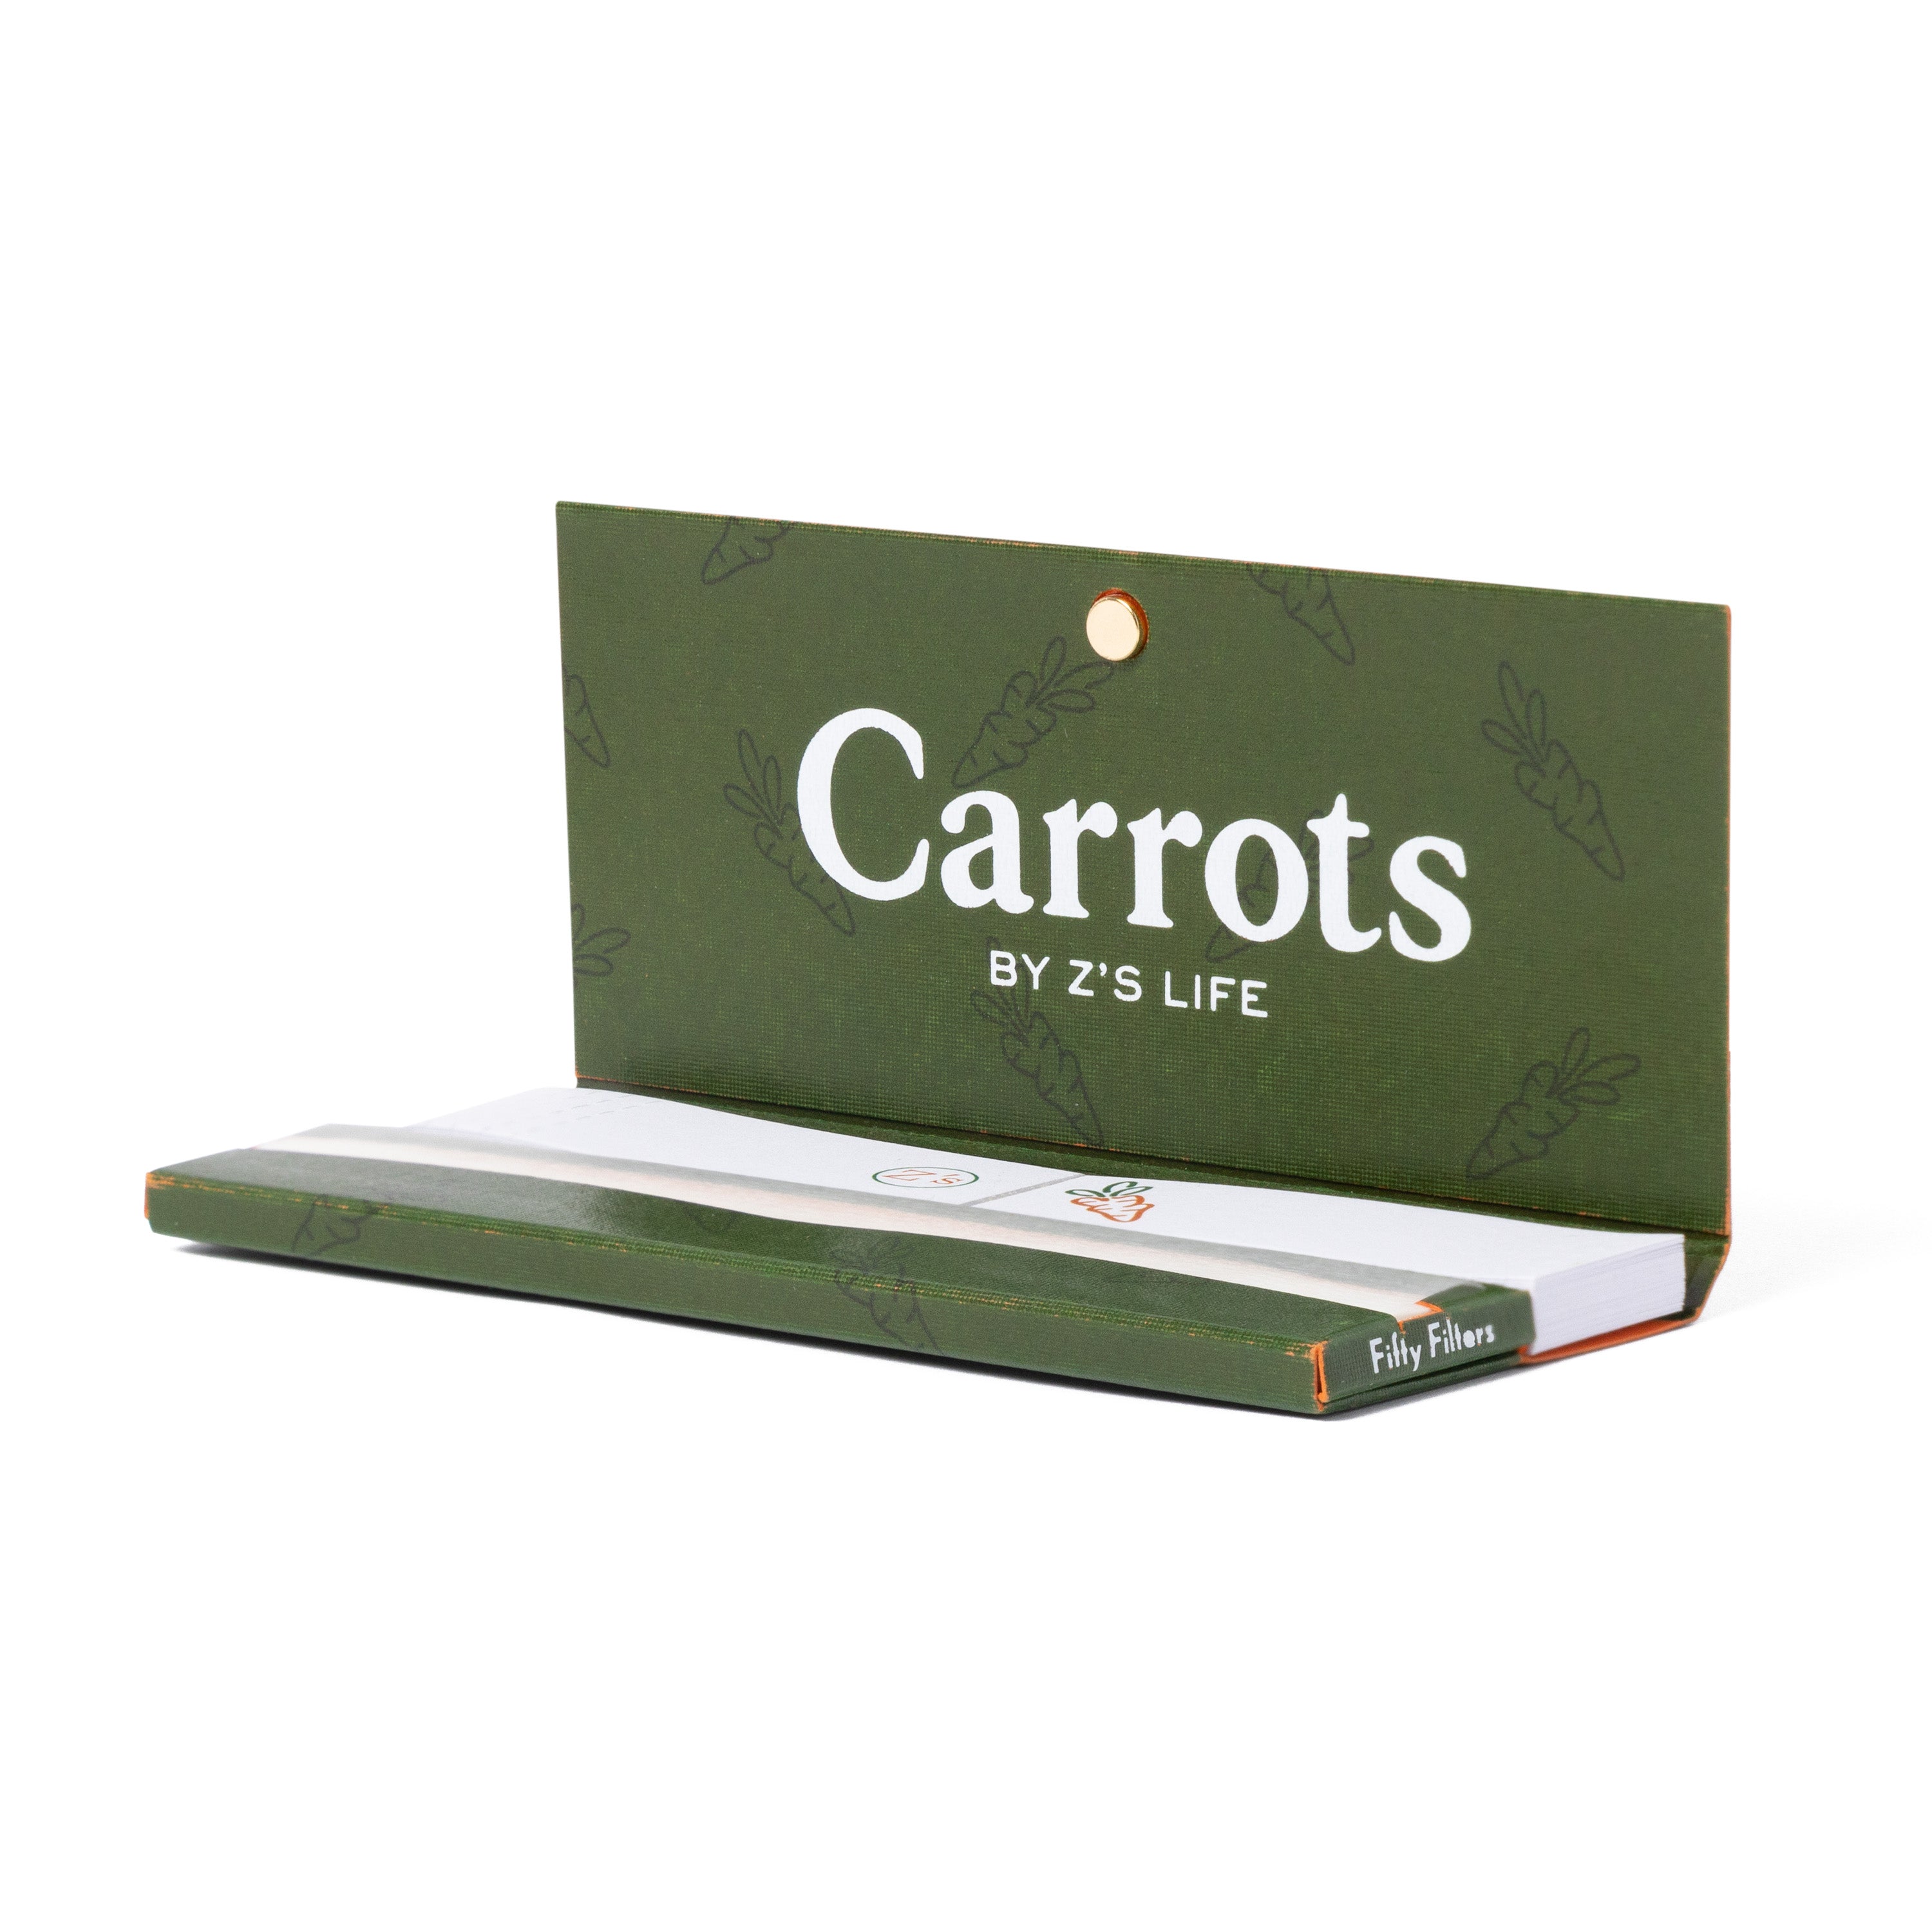 KING CARROTS ZBOOK BY Z'LIFE